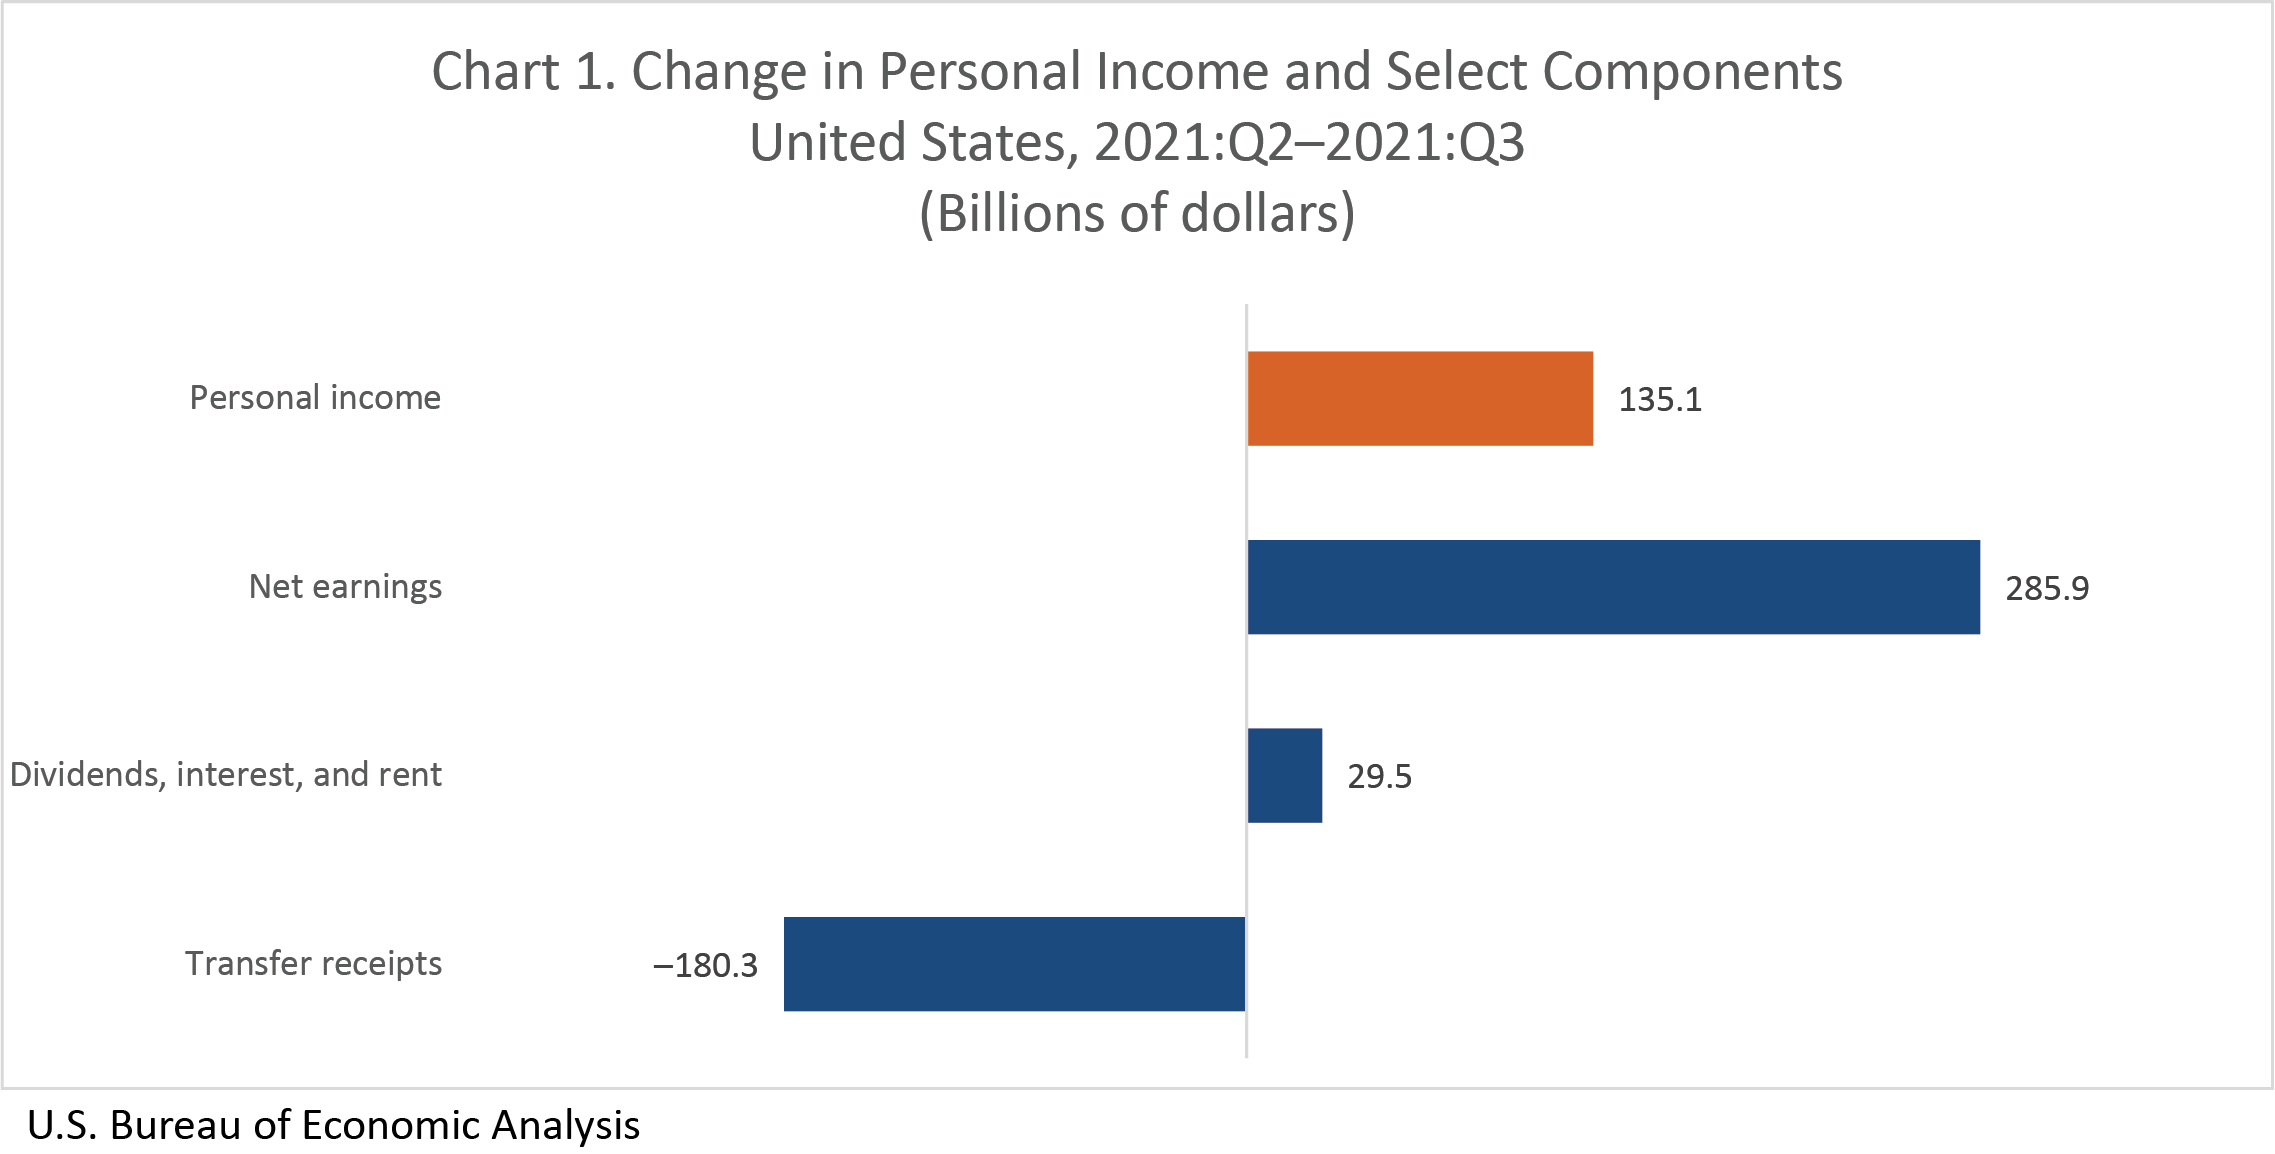 Chart 1. Change in Personal Income and Select Components: United States, 2021:Q2-2021:Q3 (Billions of dollars)